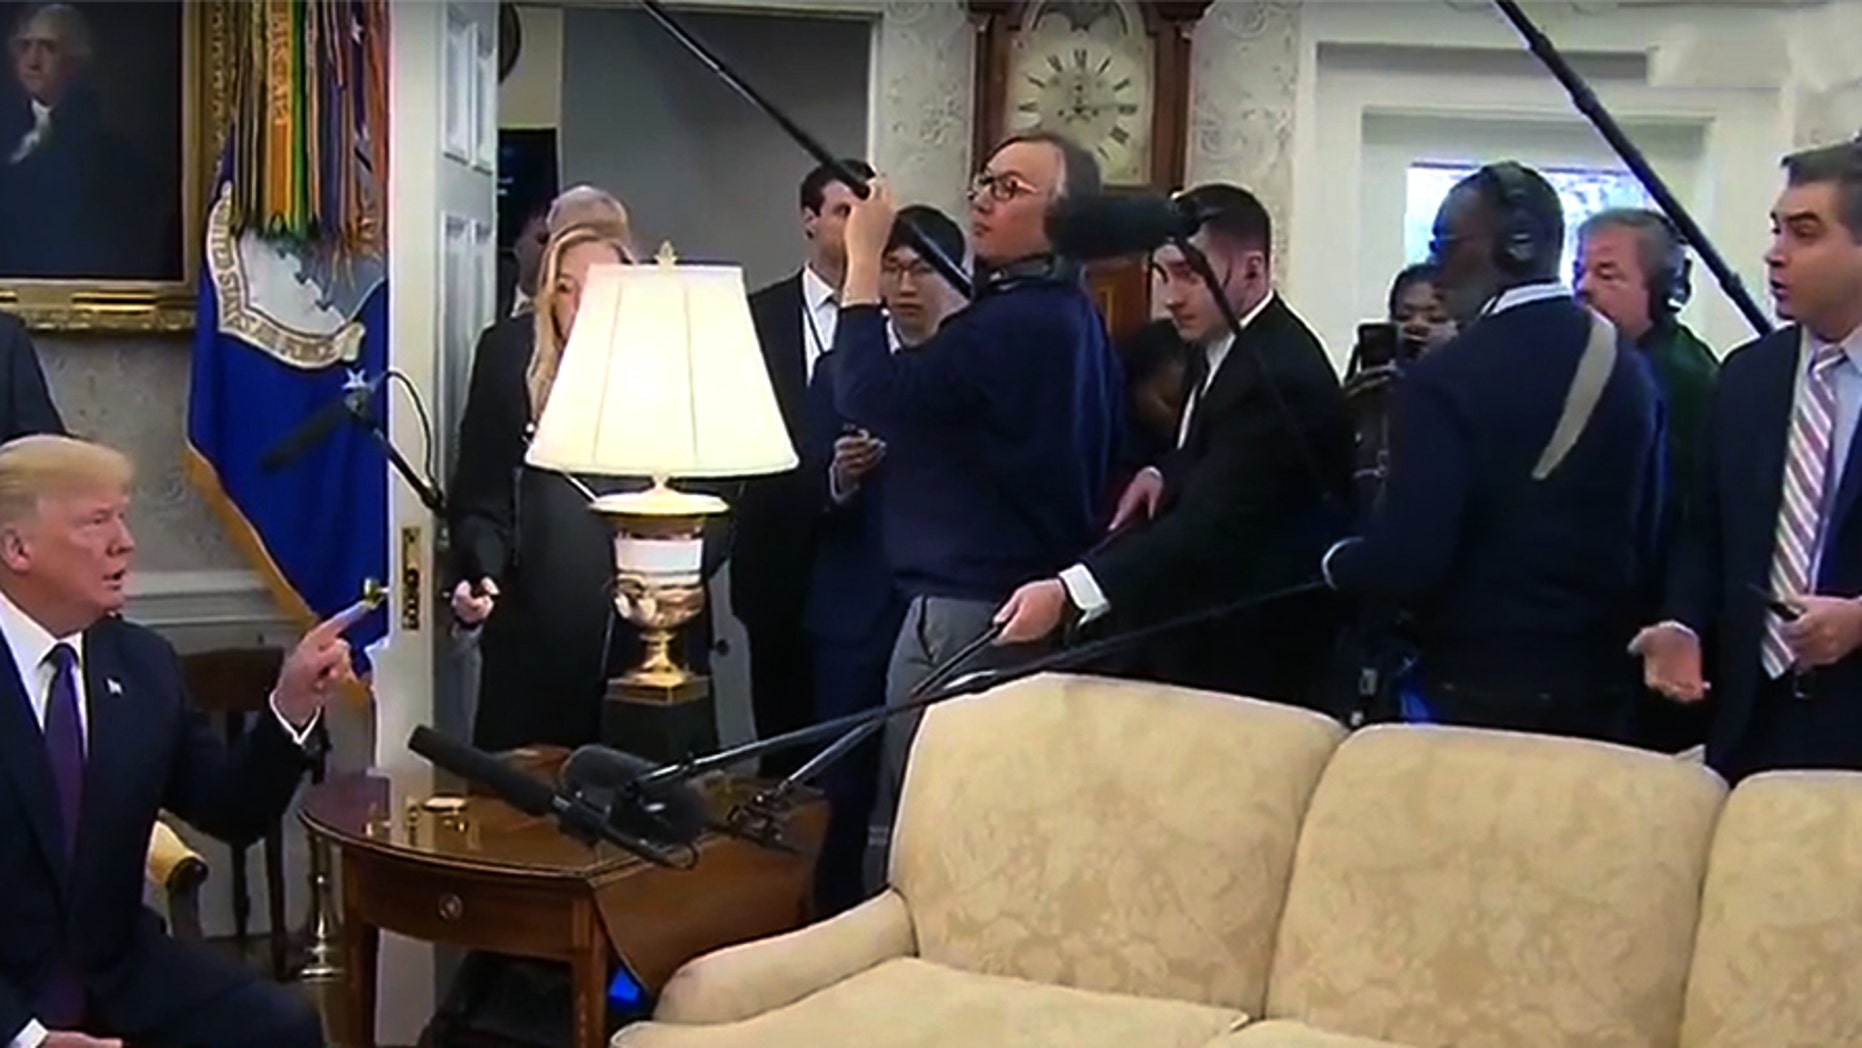 ‘out Trump Orders Cnn Star Jim Acosta To Leave Oval Office After